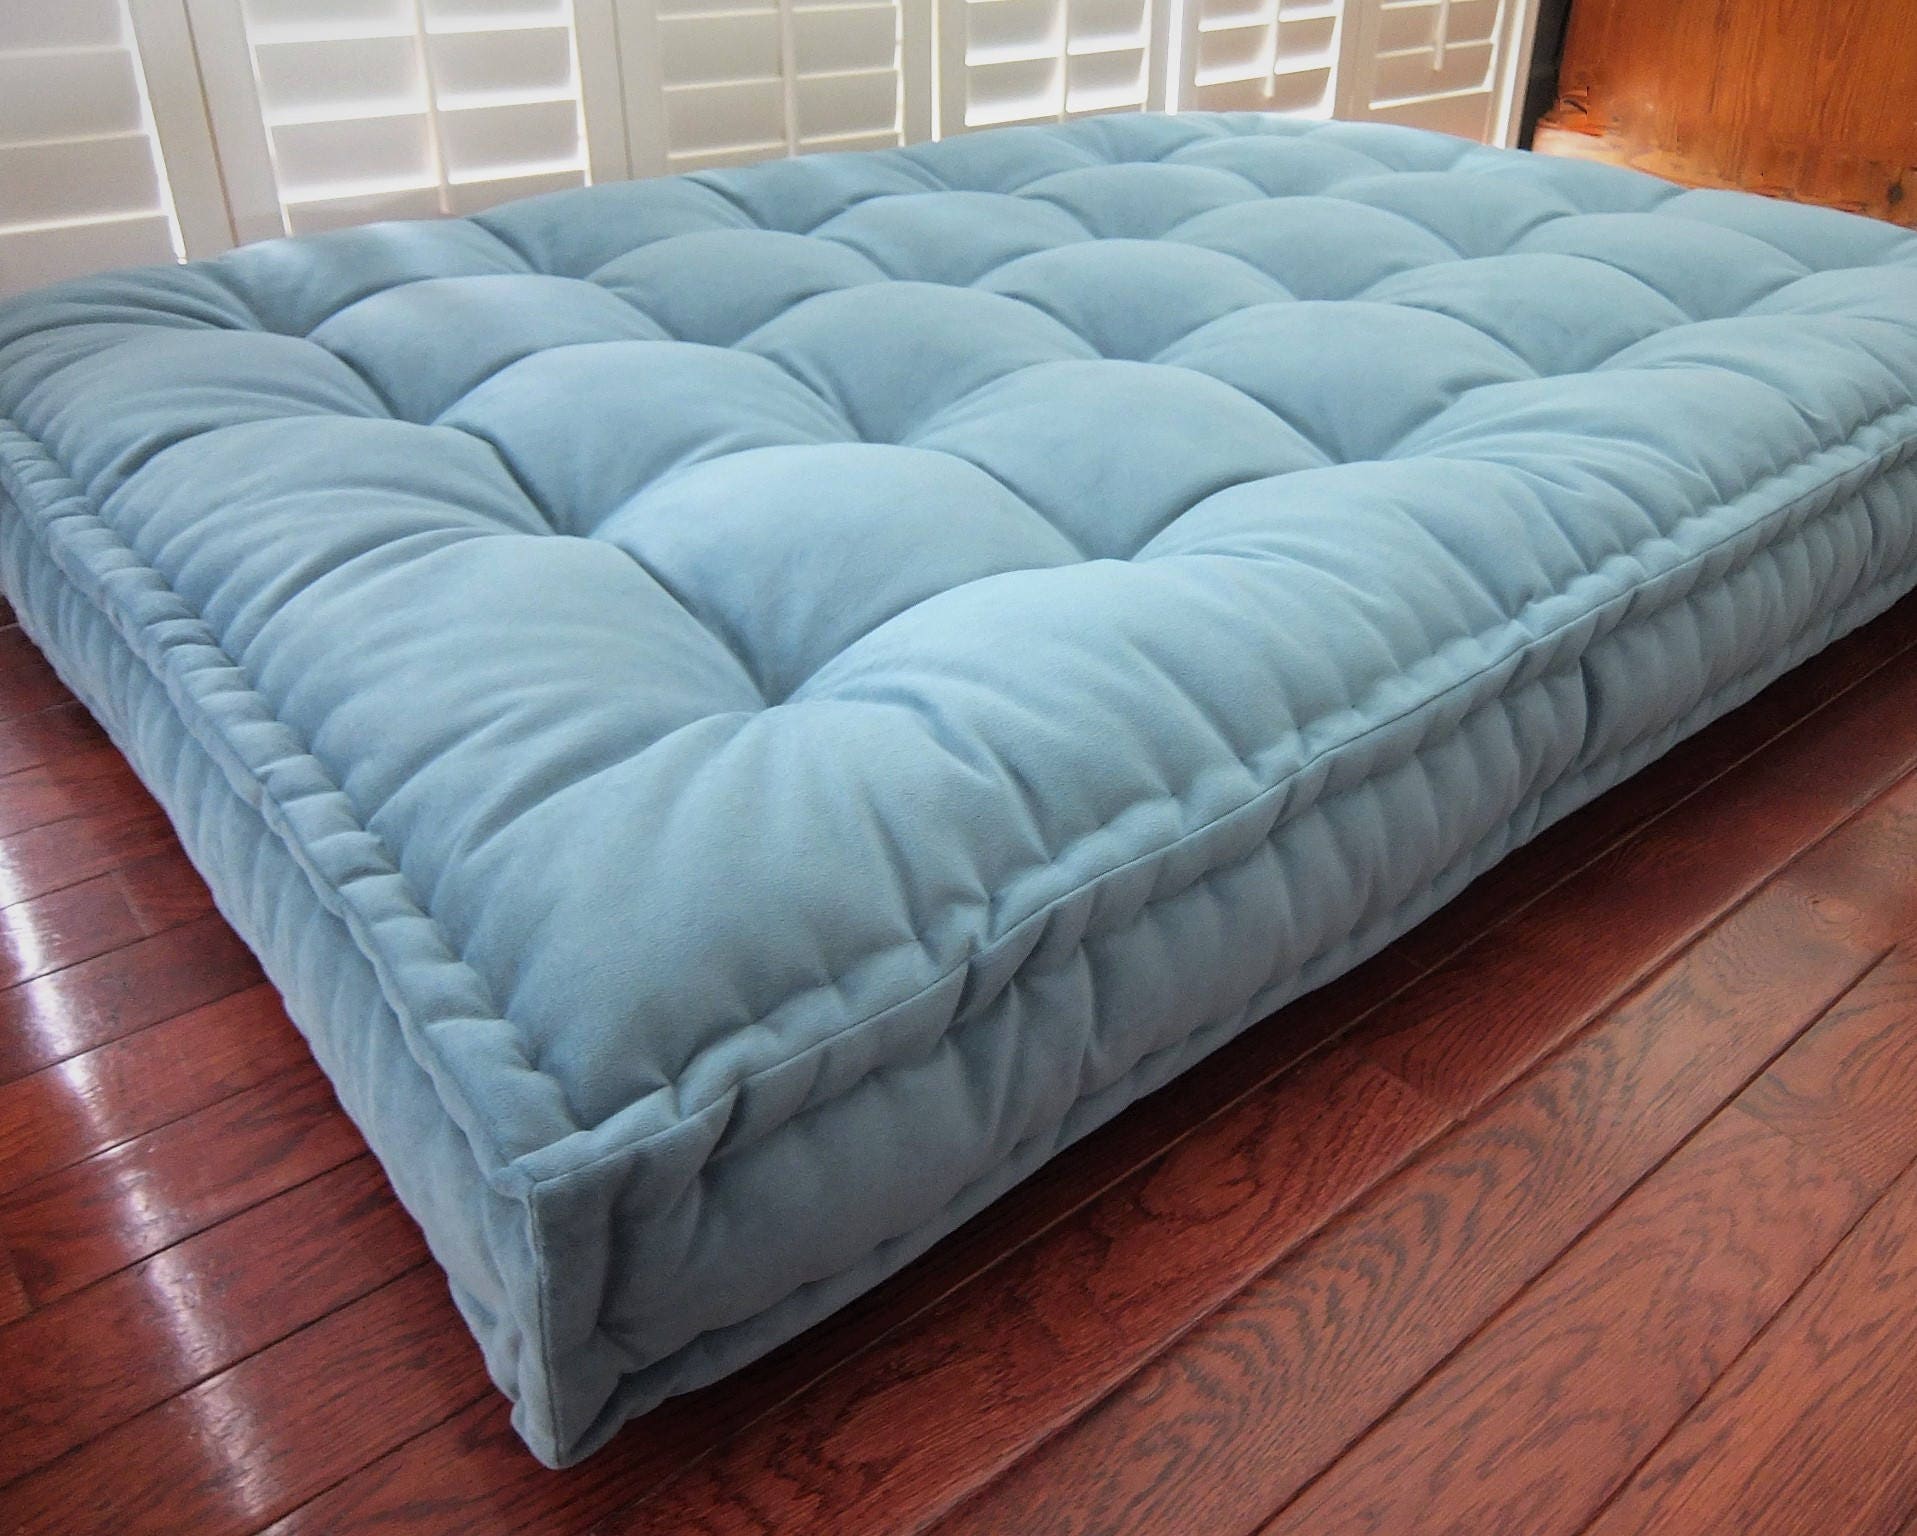 daybed mattress 36 x 77 inches